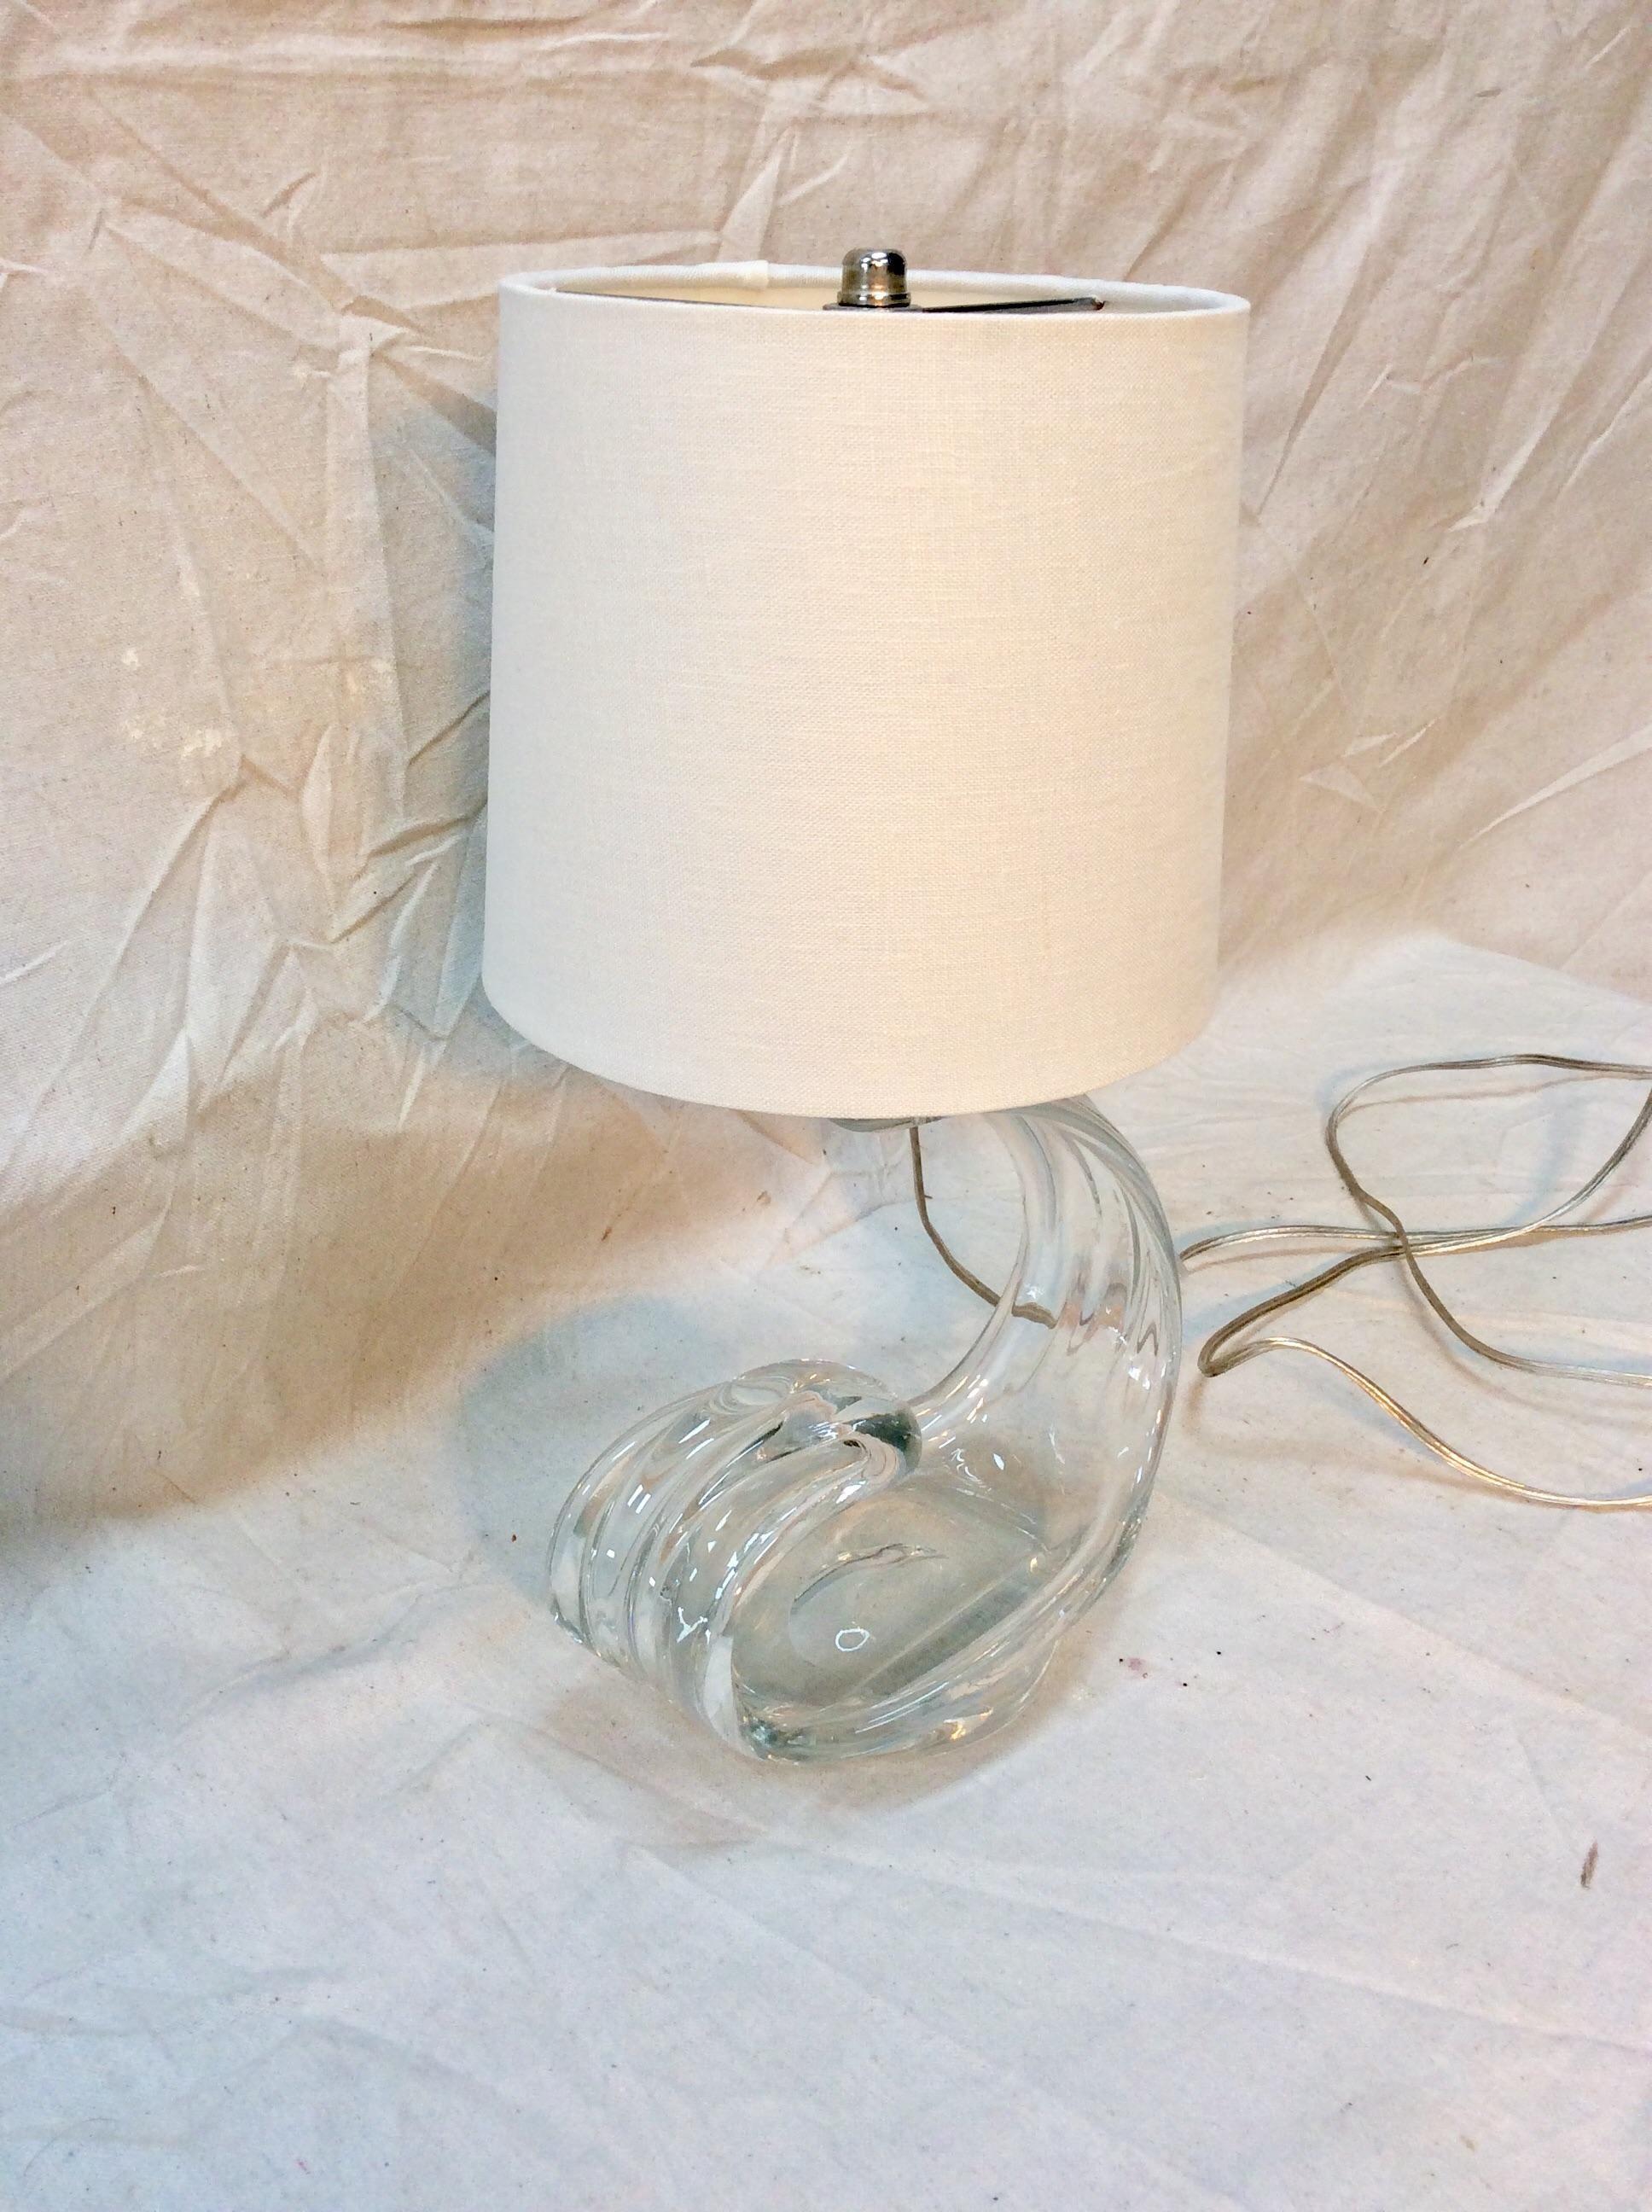 Found in the South of France, this Mid-20th century French Art Glass Table Lamp features hand blown organic formed crystal that sparkles in the light. This piece is newly wired in the French style to US standards with a chrome socket and an in line